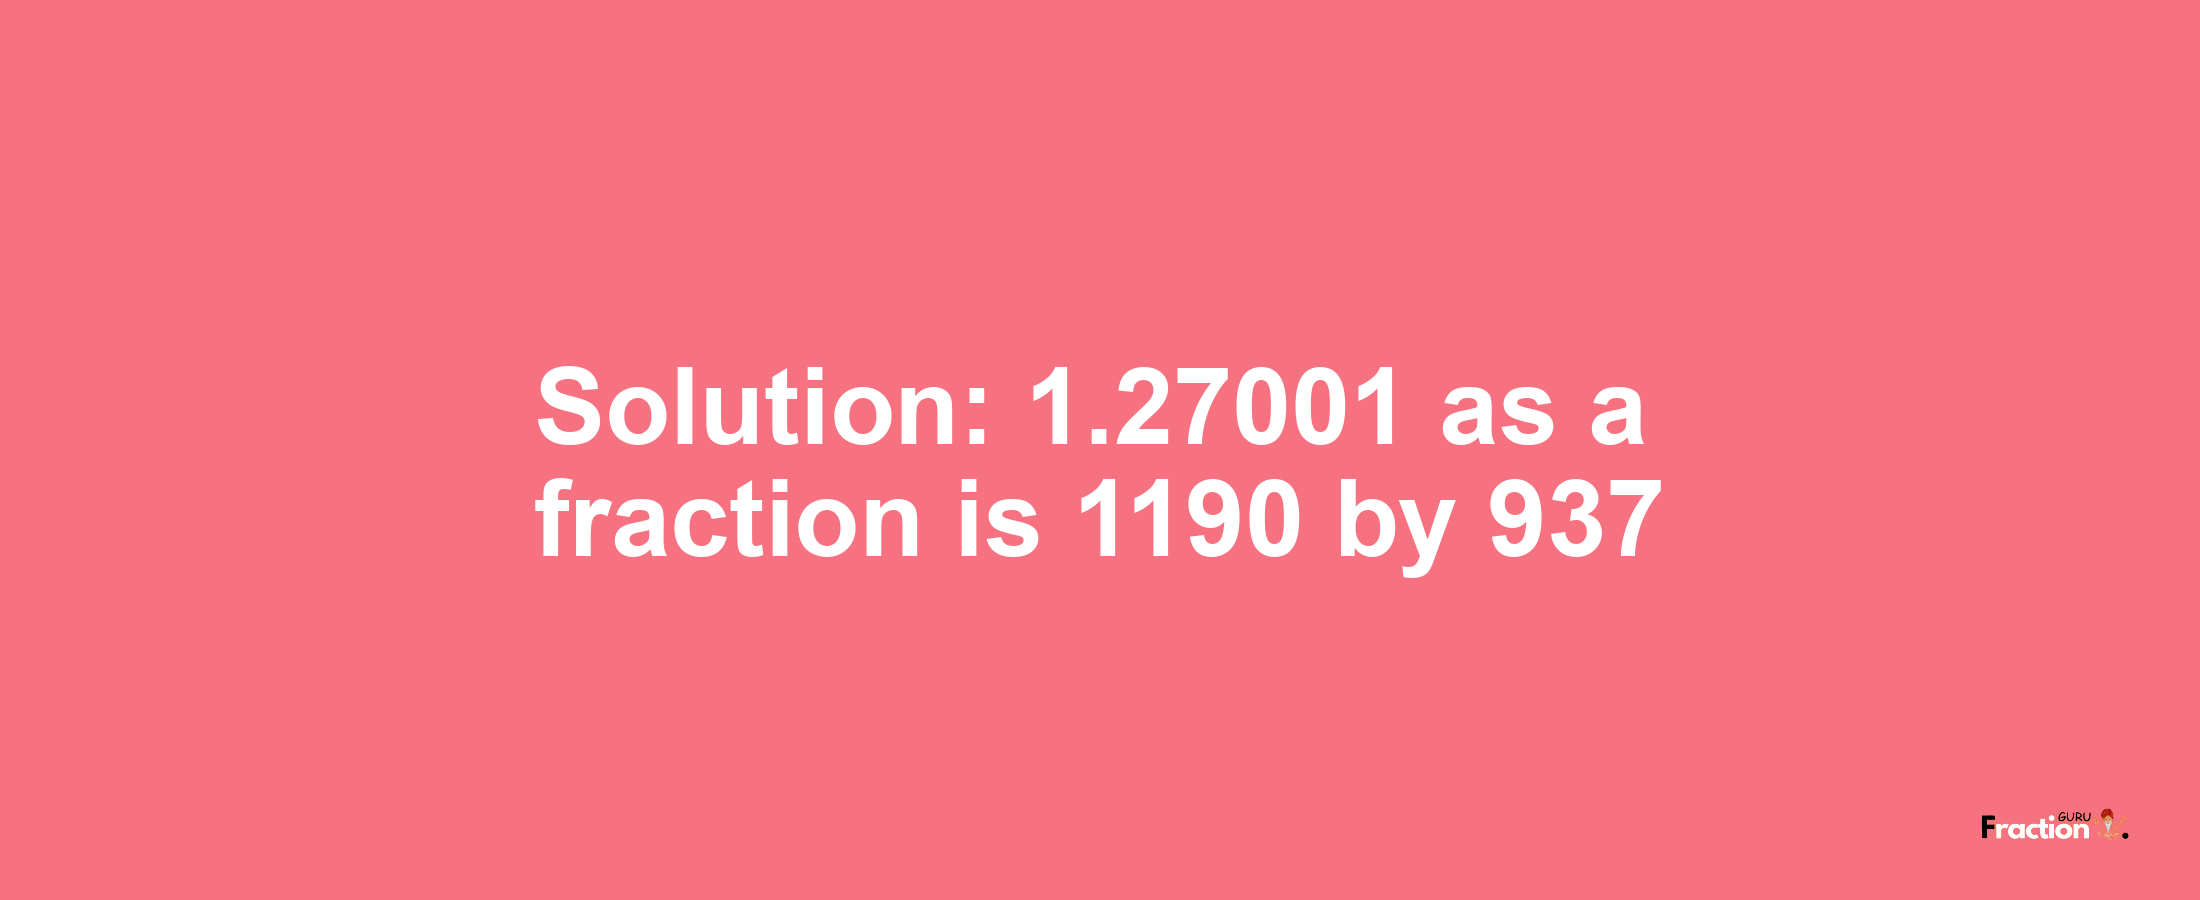 Solution:1.27001 as a fraction is 1190/937